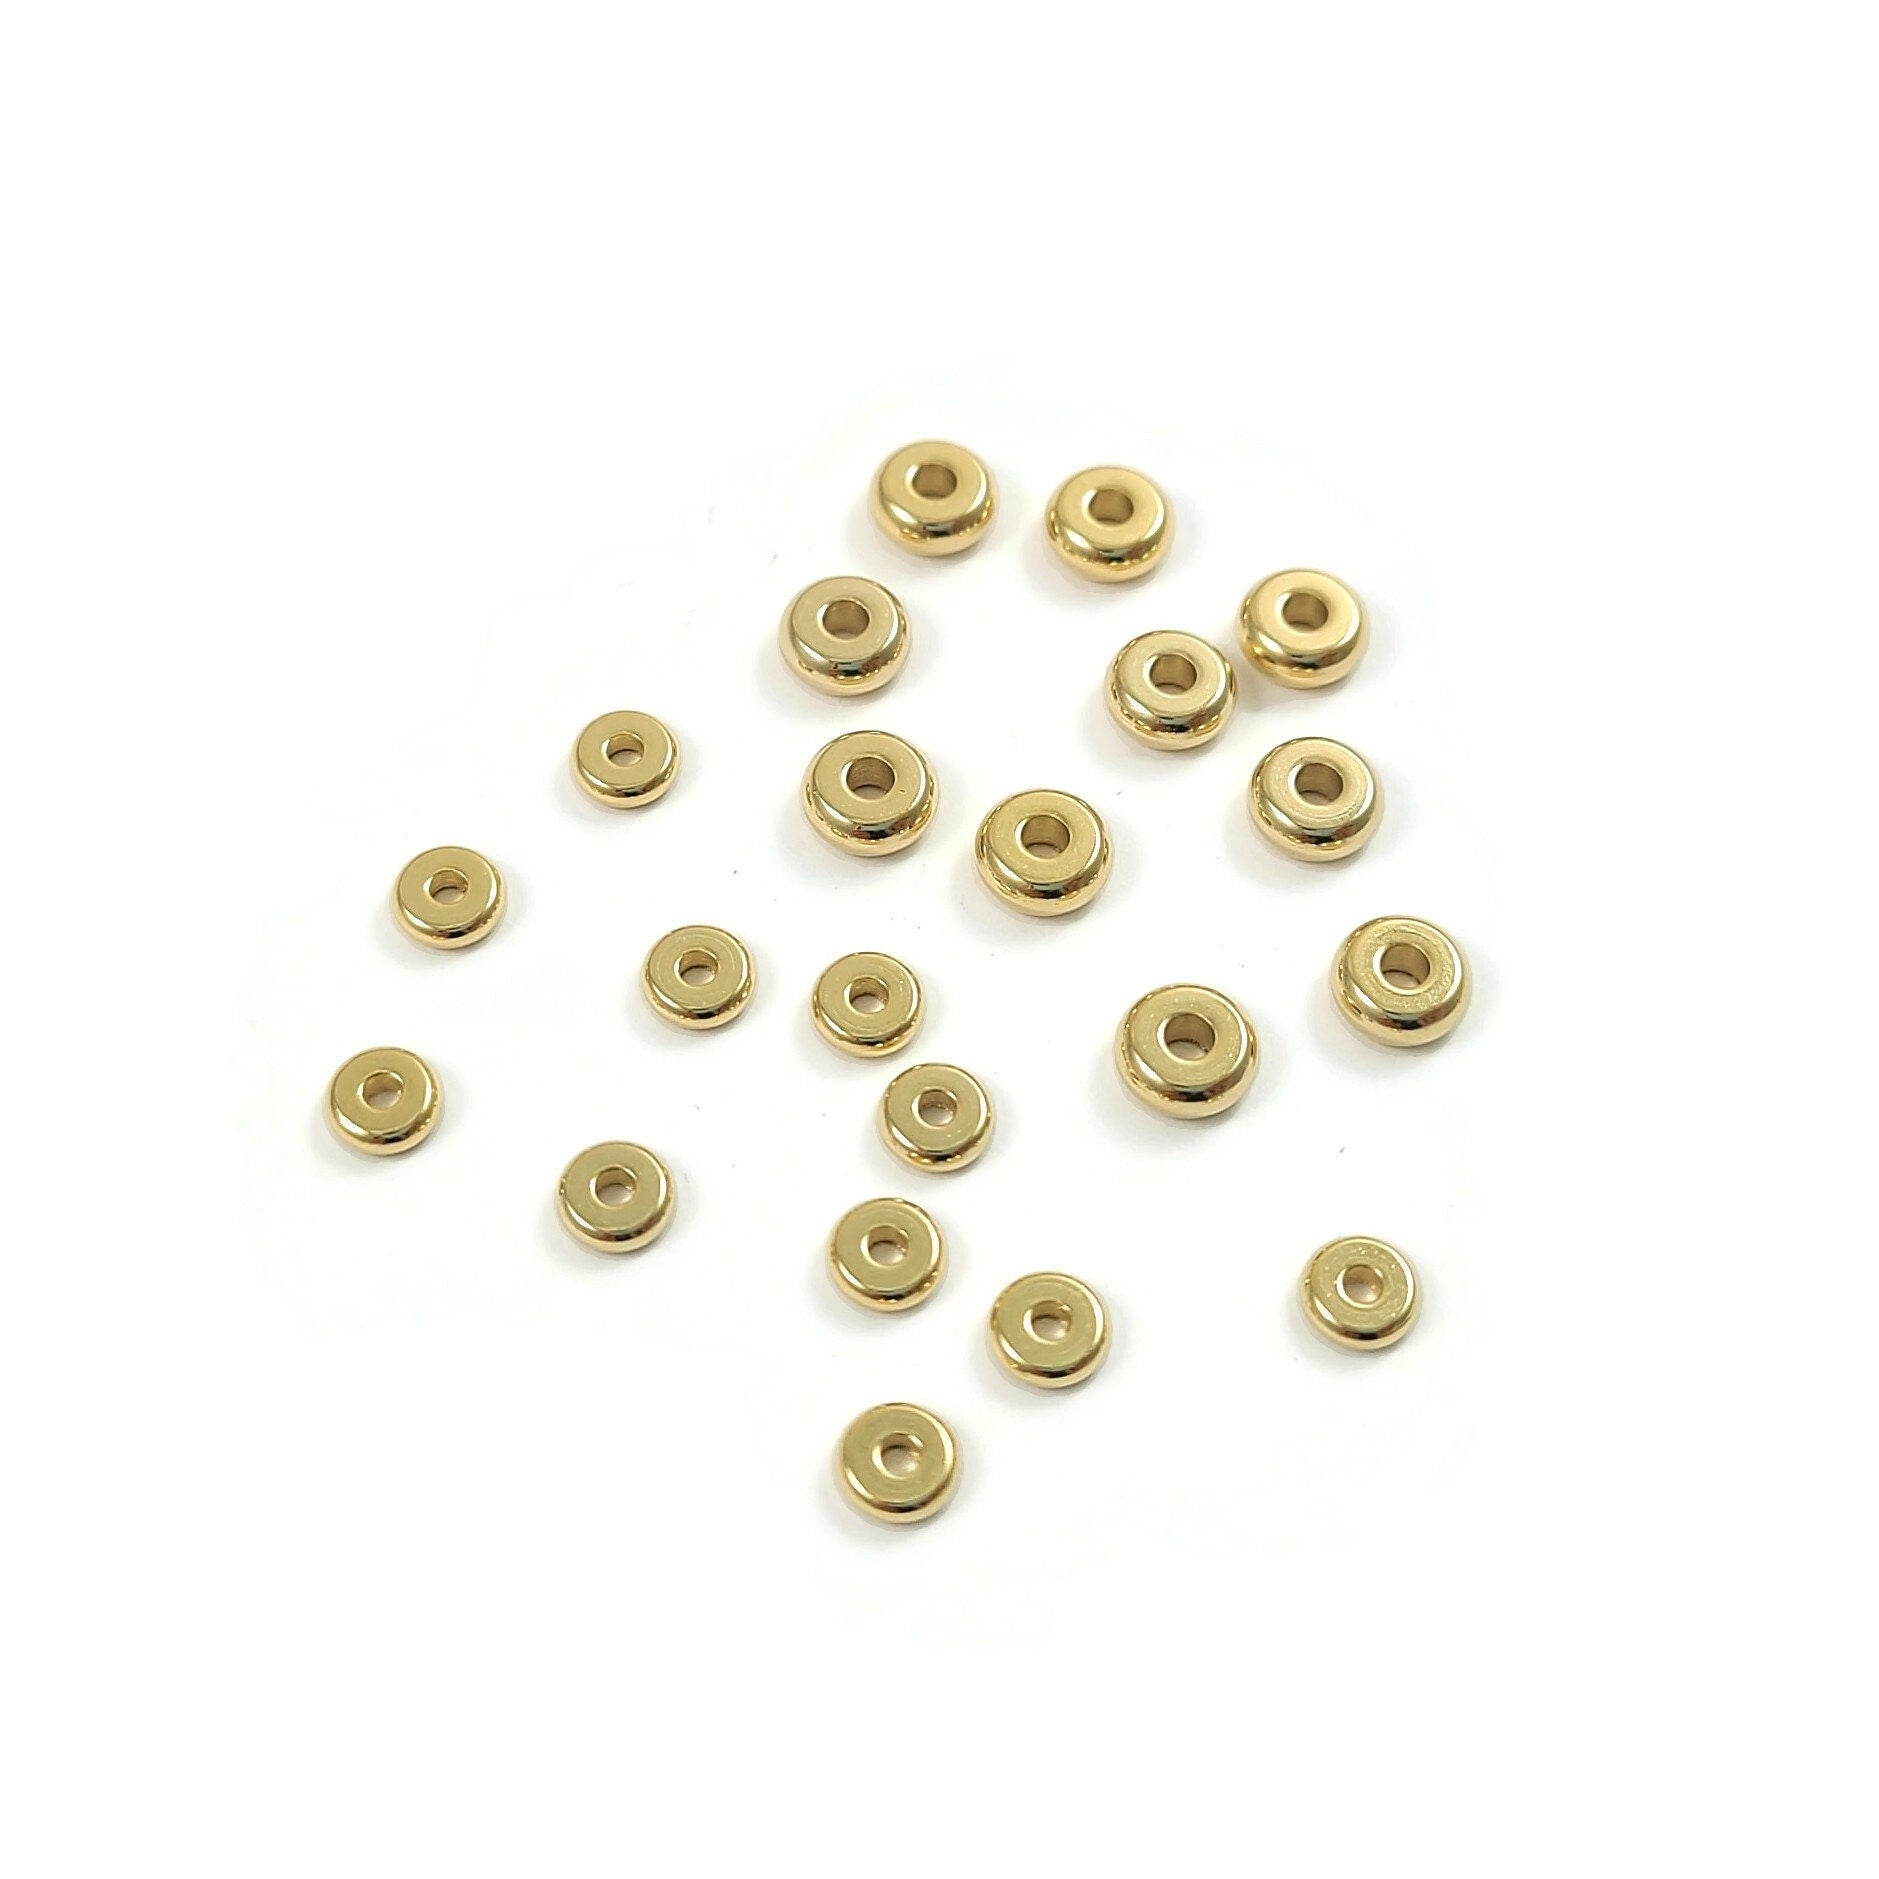 Stainless Steel and 18k Gold Over Stainless Steel Double Ring Spacer Bead  appx 70 Pieces total - JMKIT1774 in 2023